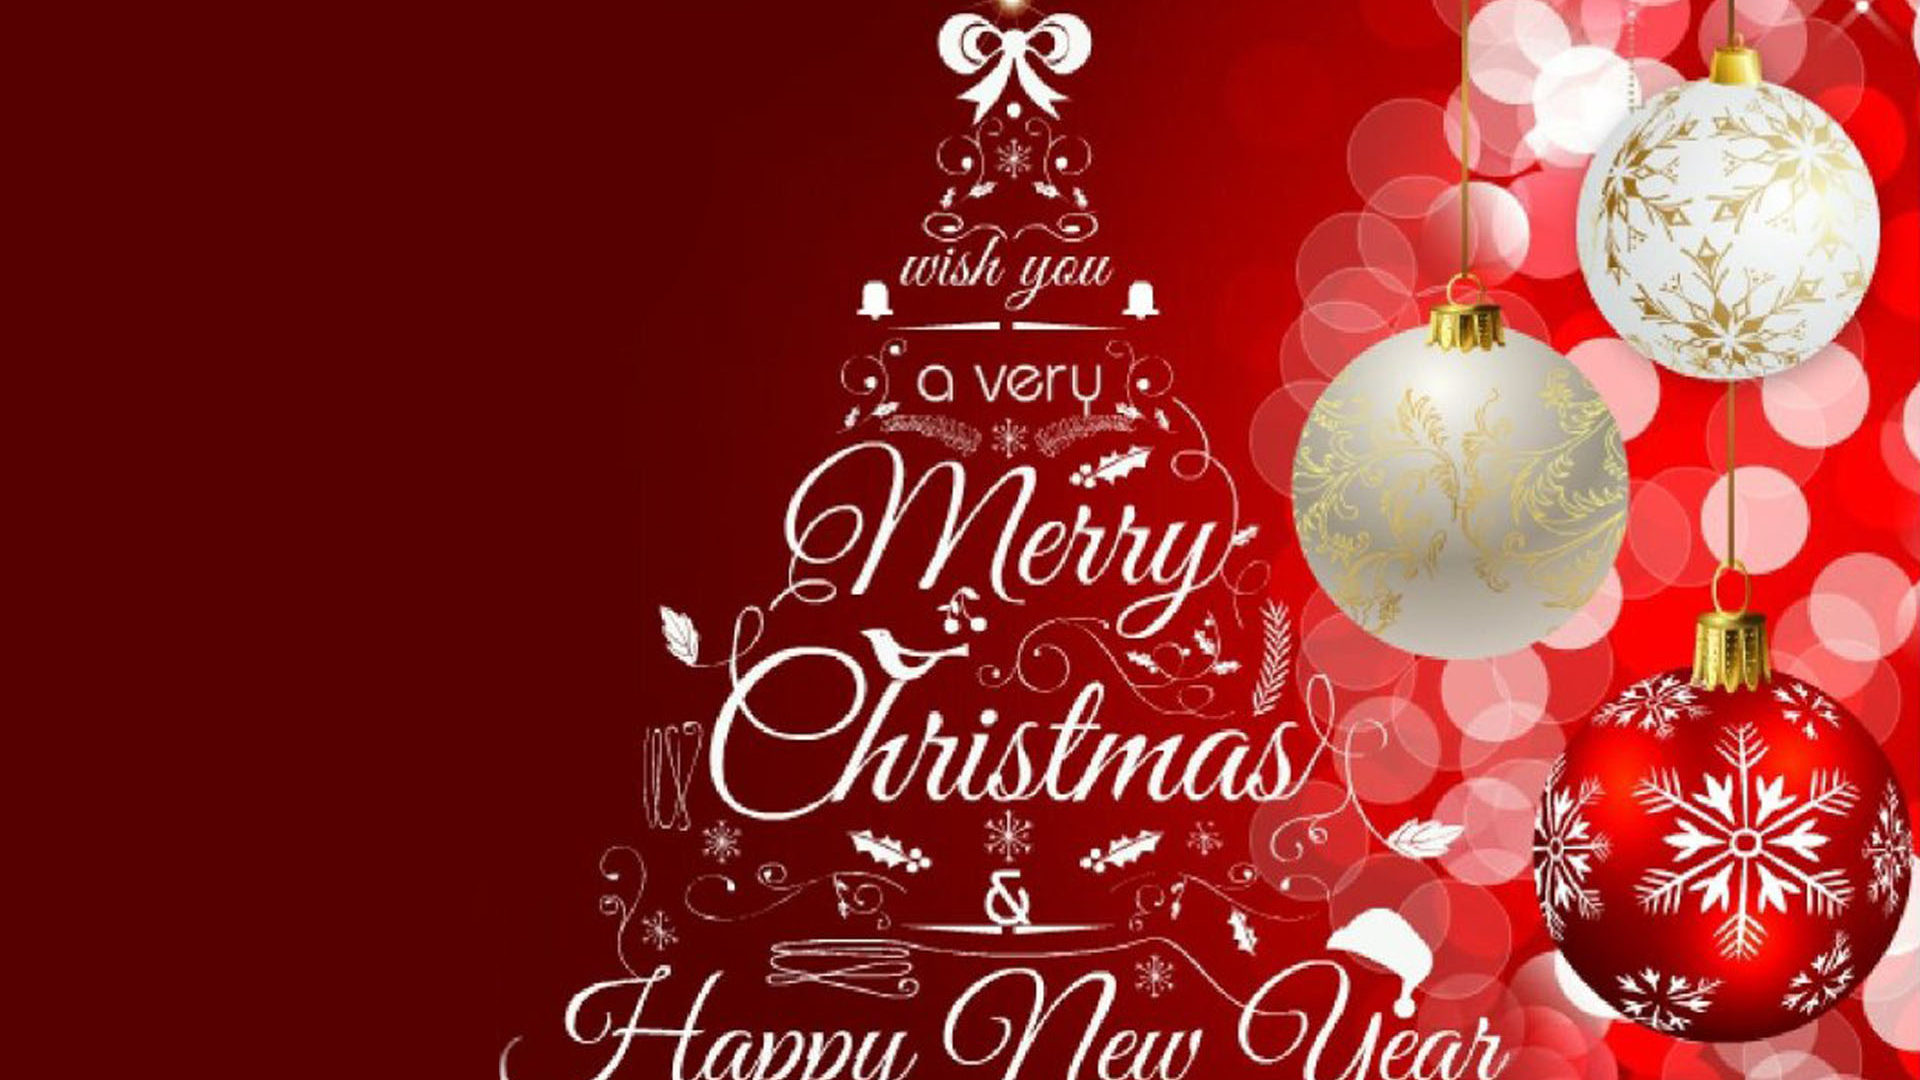 Free download Greeting Card Merry Christmas And Happy New Year 2020